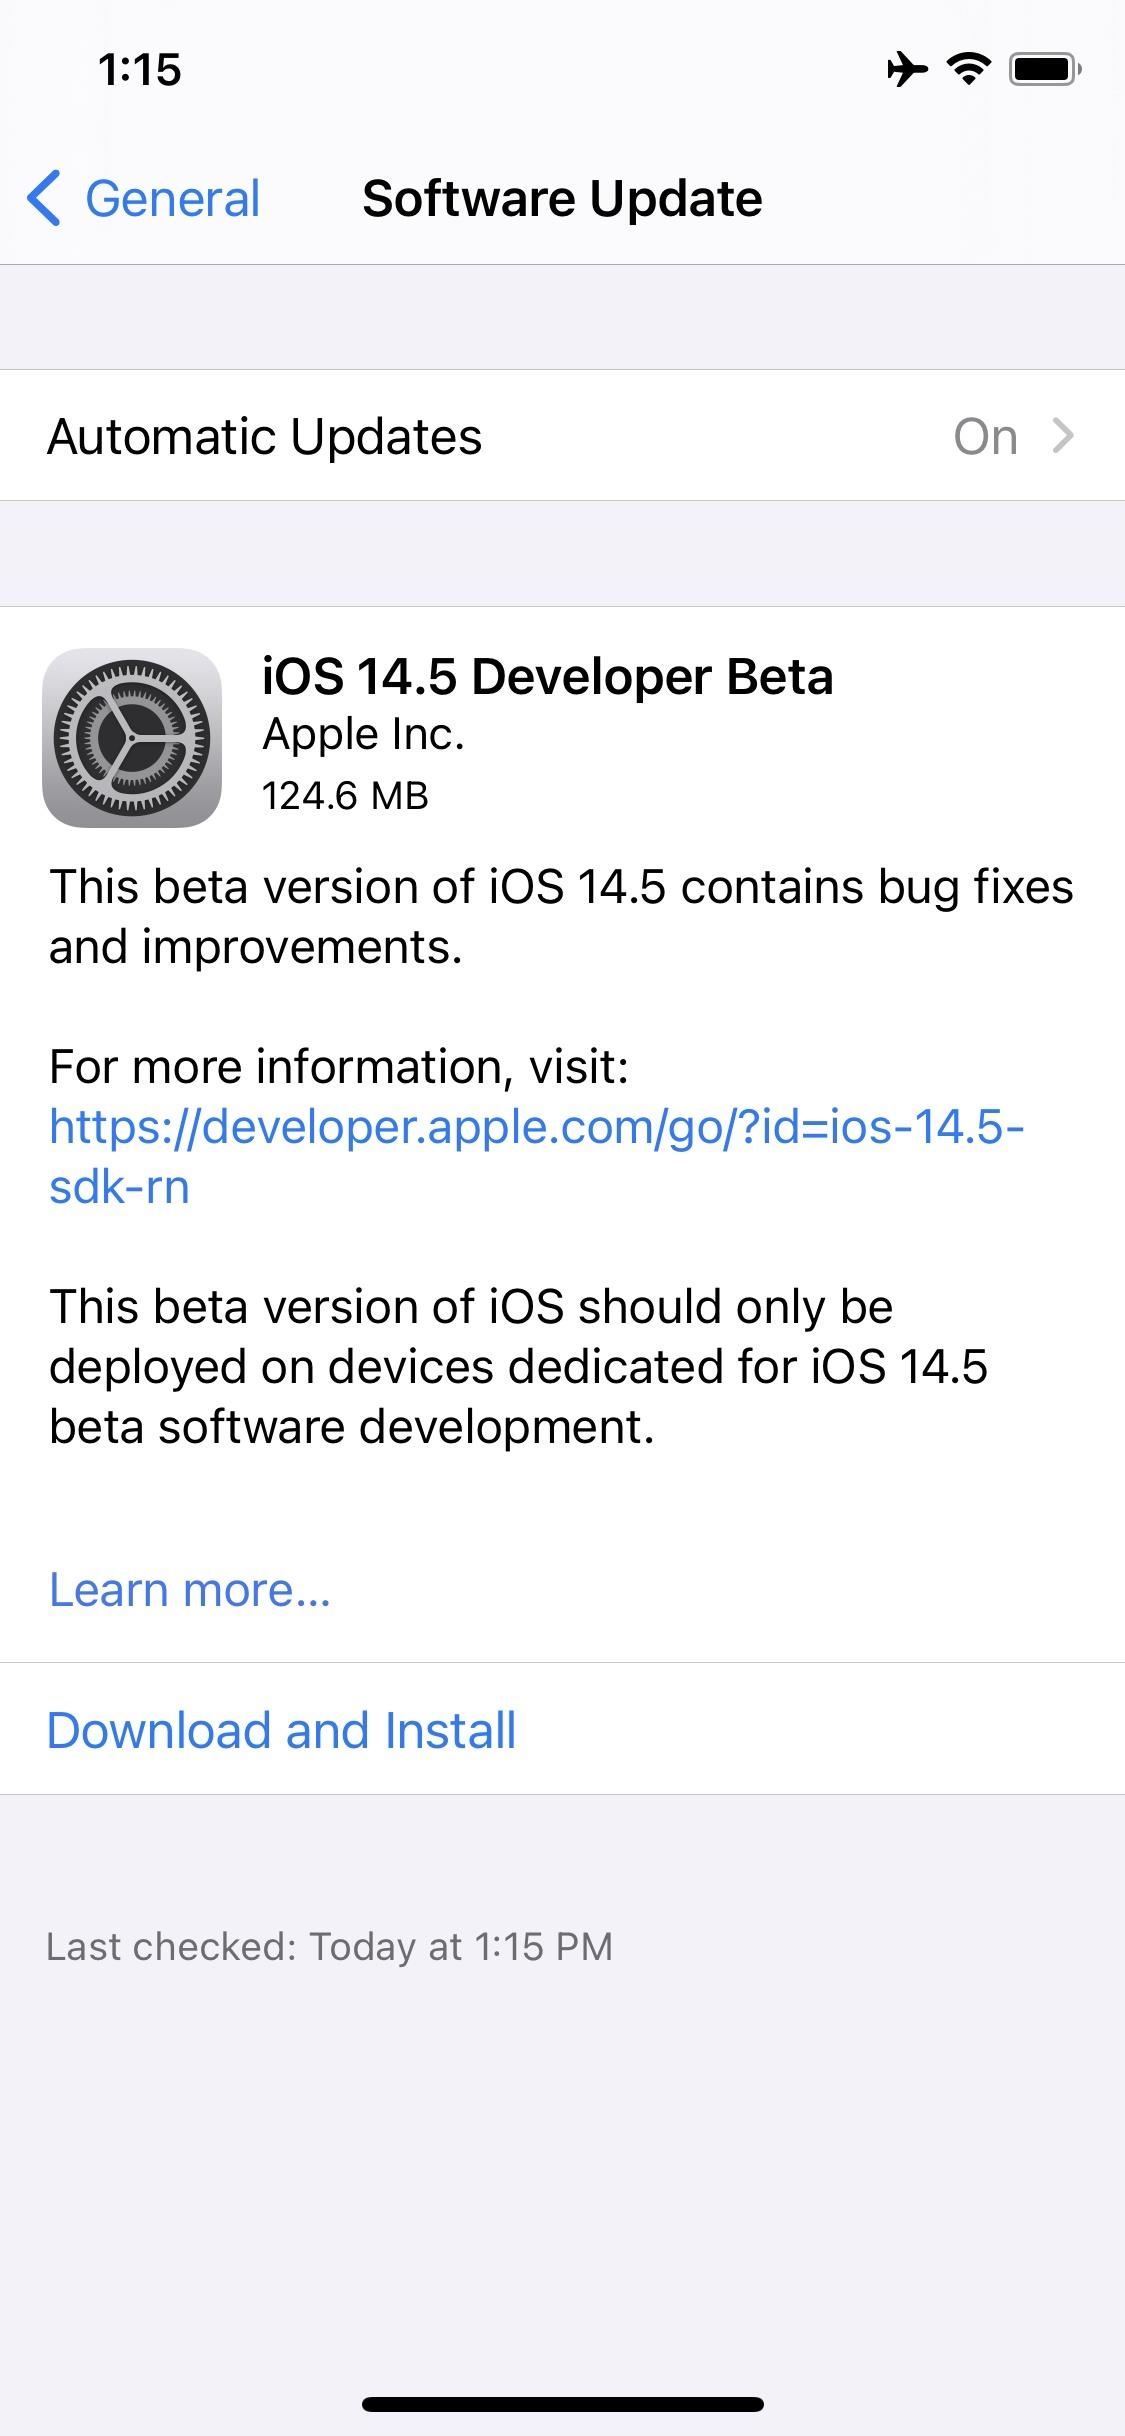 Apple Releases First iOS 14.5 Developer Beta for iPhone, Adds Support for Xbox Series X & PS5 DualSense Controllers